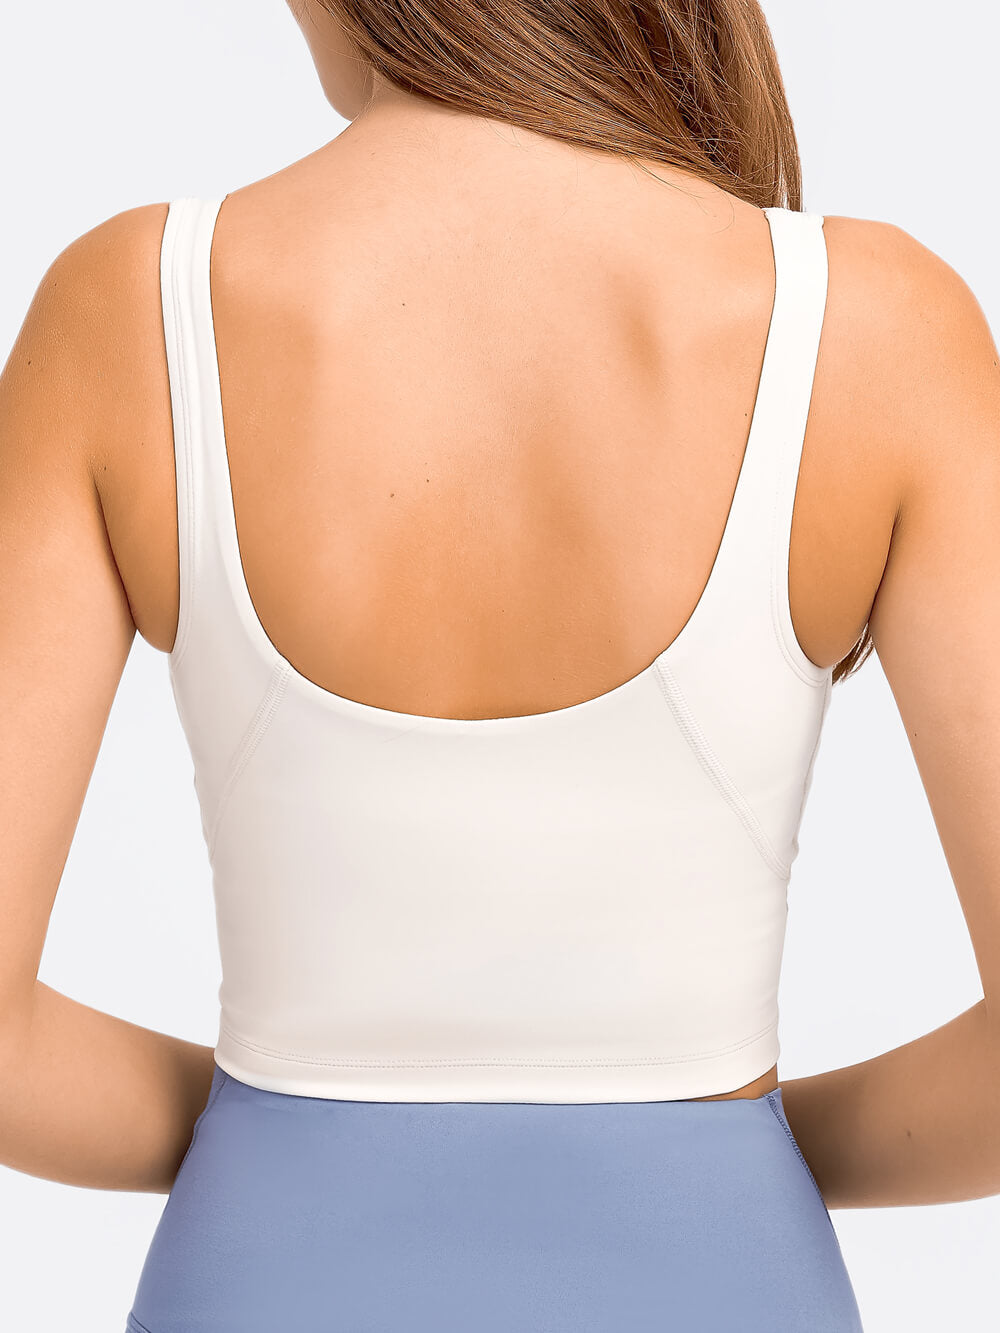 XUETON High Impact Sports Bras for Women Full Cup Racerback Bra Workout  Crop Tops for Yoga Gym Workout Fitness Plus Size(Beige,Small) at   Women's Clothing store